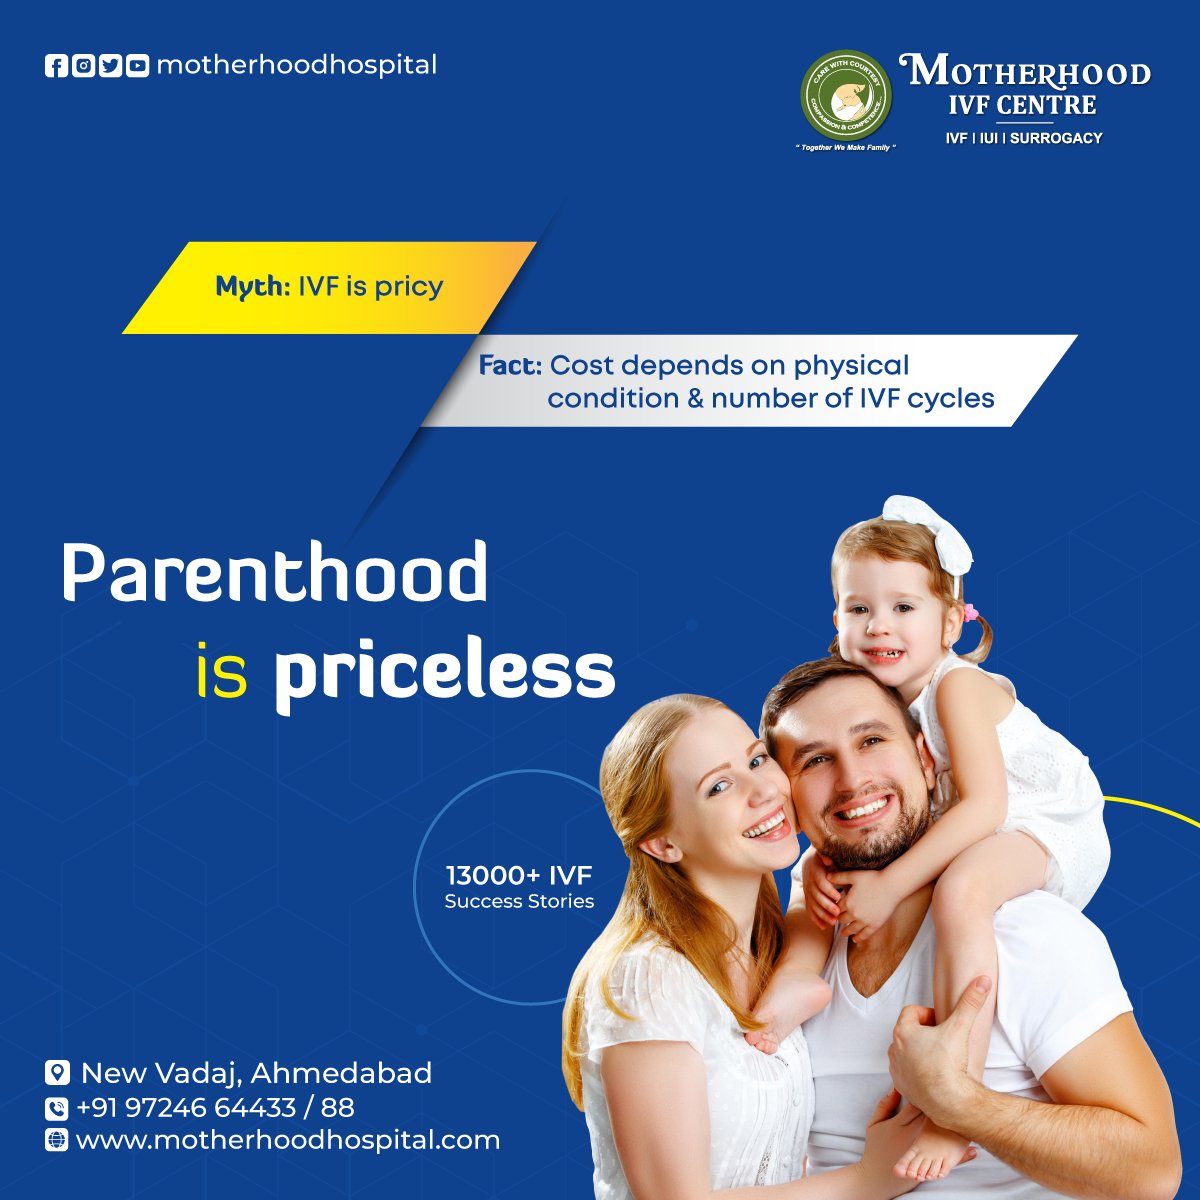 IVF cost varies based on several factors. Consult with a specialist for accurate information

Call: 9724664433/88
Visit: motherhoodhospital.com/ivf-center-in-…

#MotherhoodIVFCenter #Infertility #IVF #IVFMYTH #Healthylifestyle #IVFCenter #IVFTreatment #Ahmedabad #NewVadaj #MotherhoodHospital